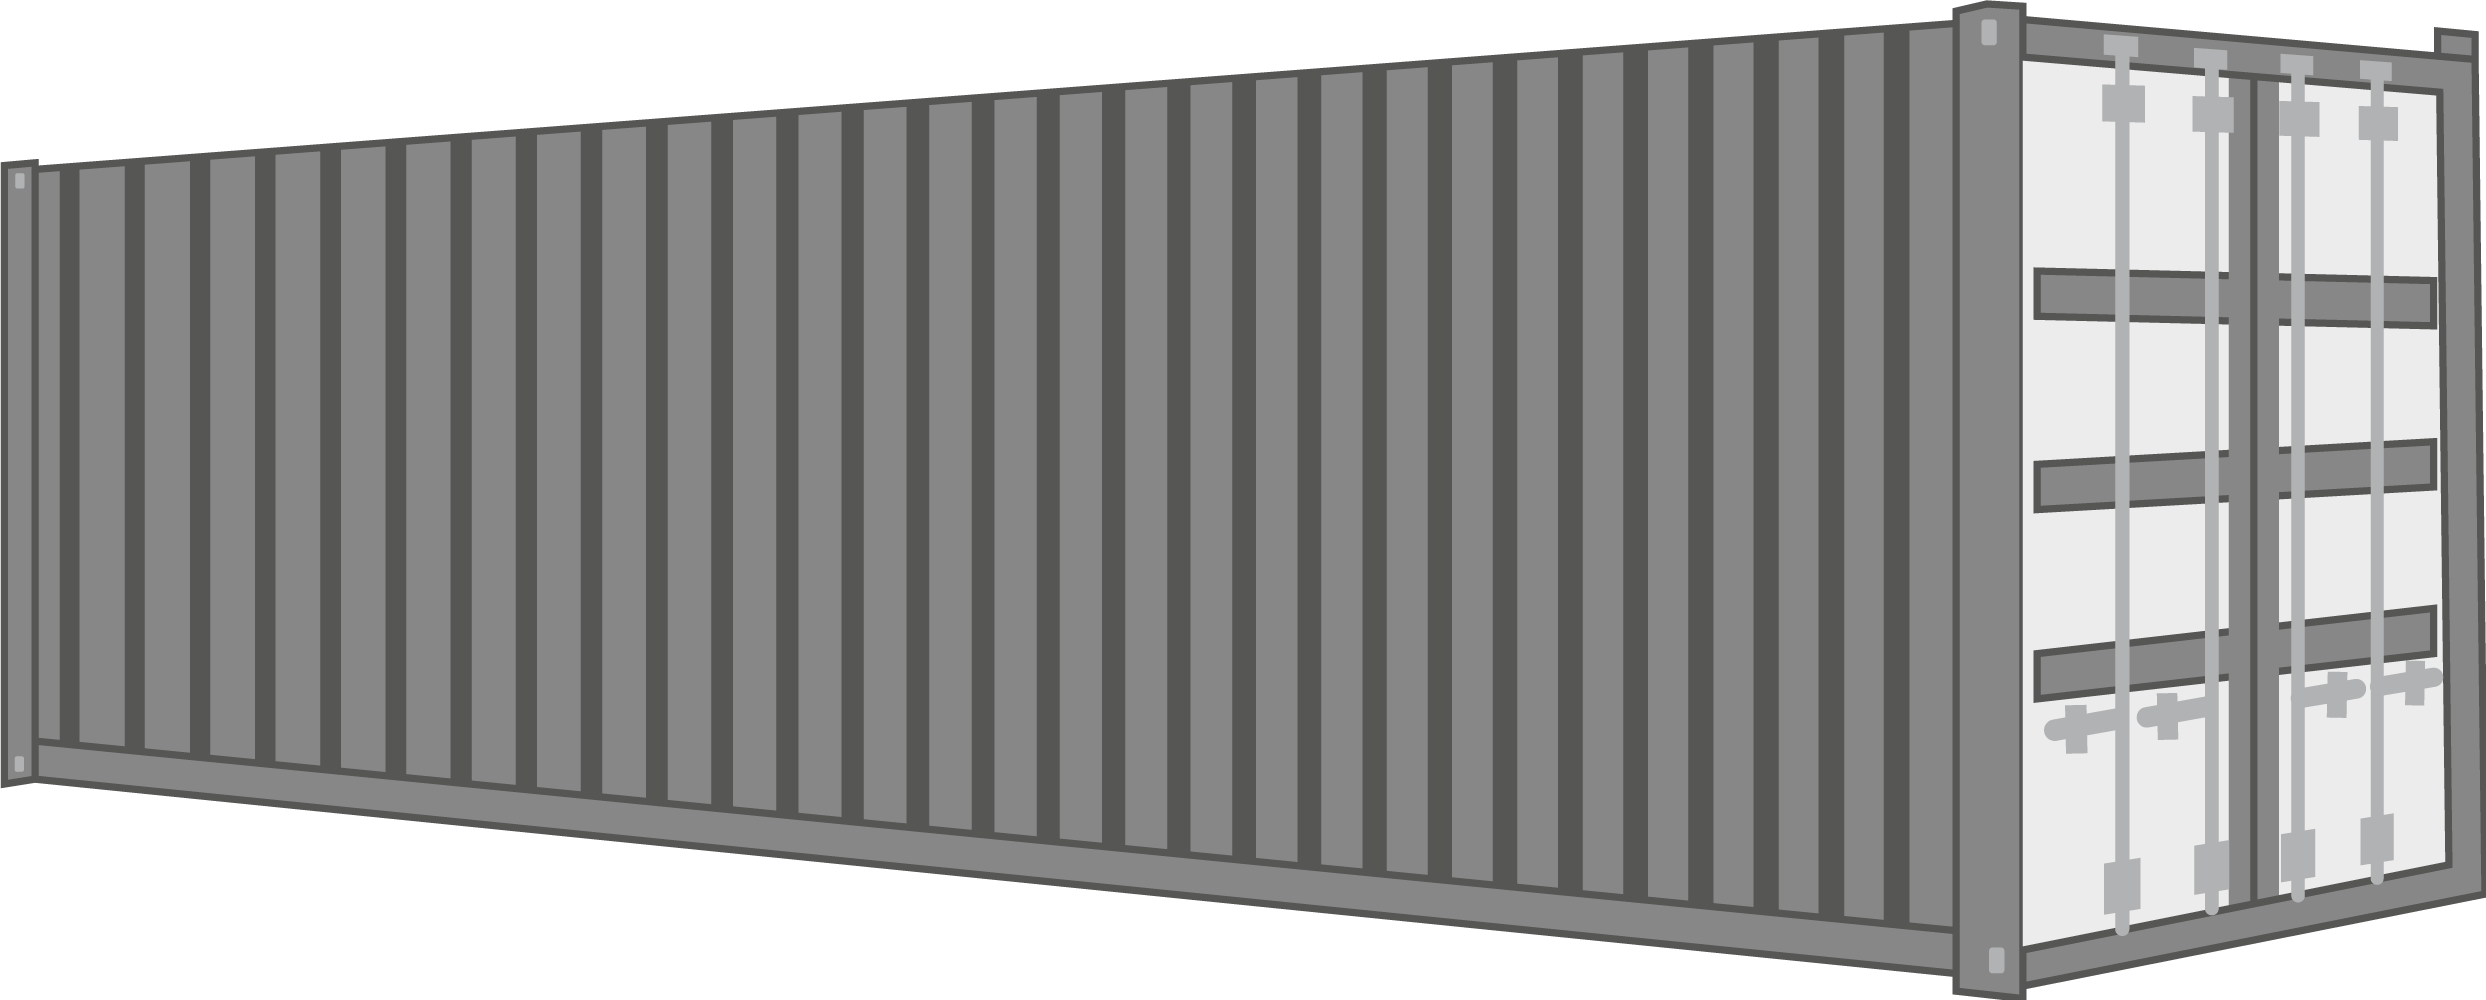 Seecontainer 40 ft